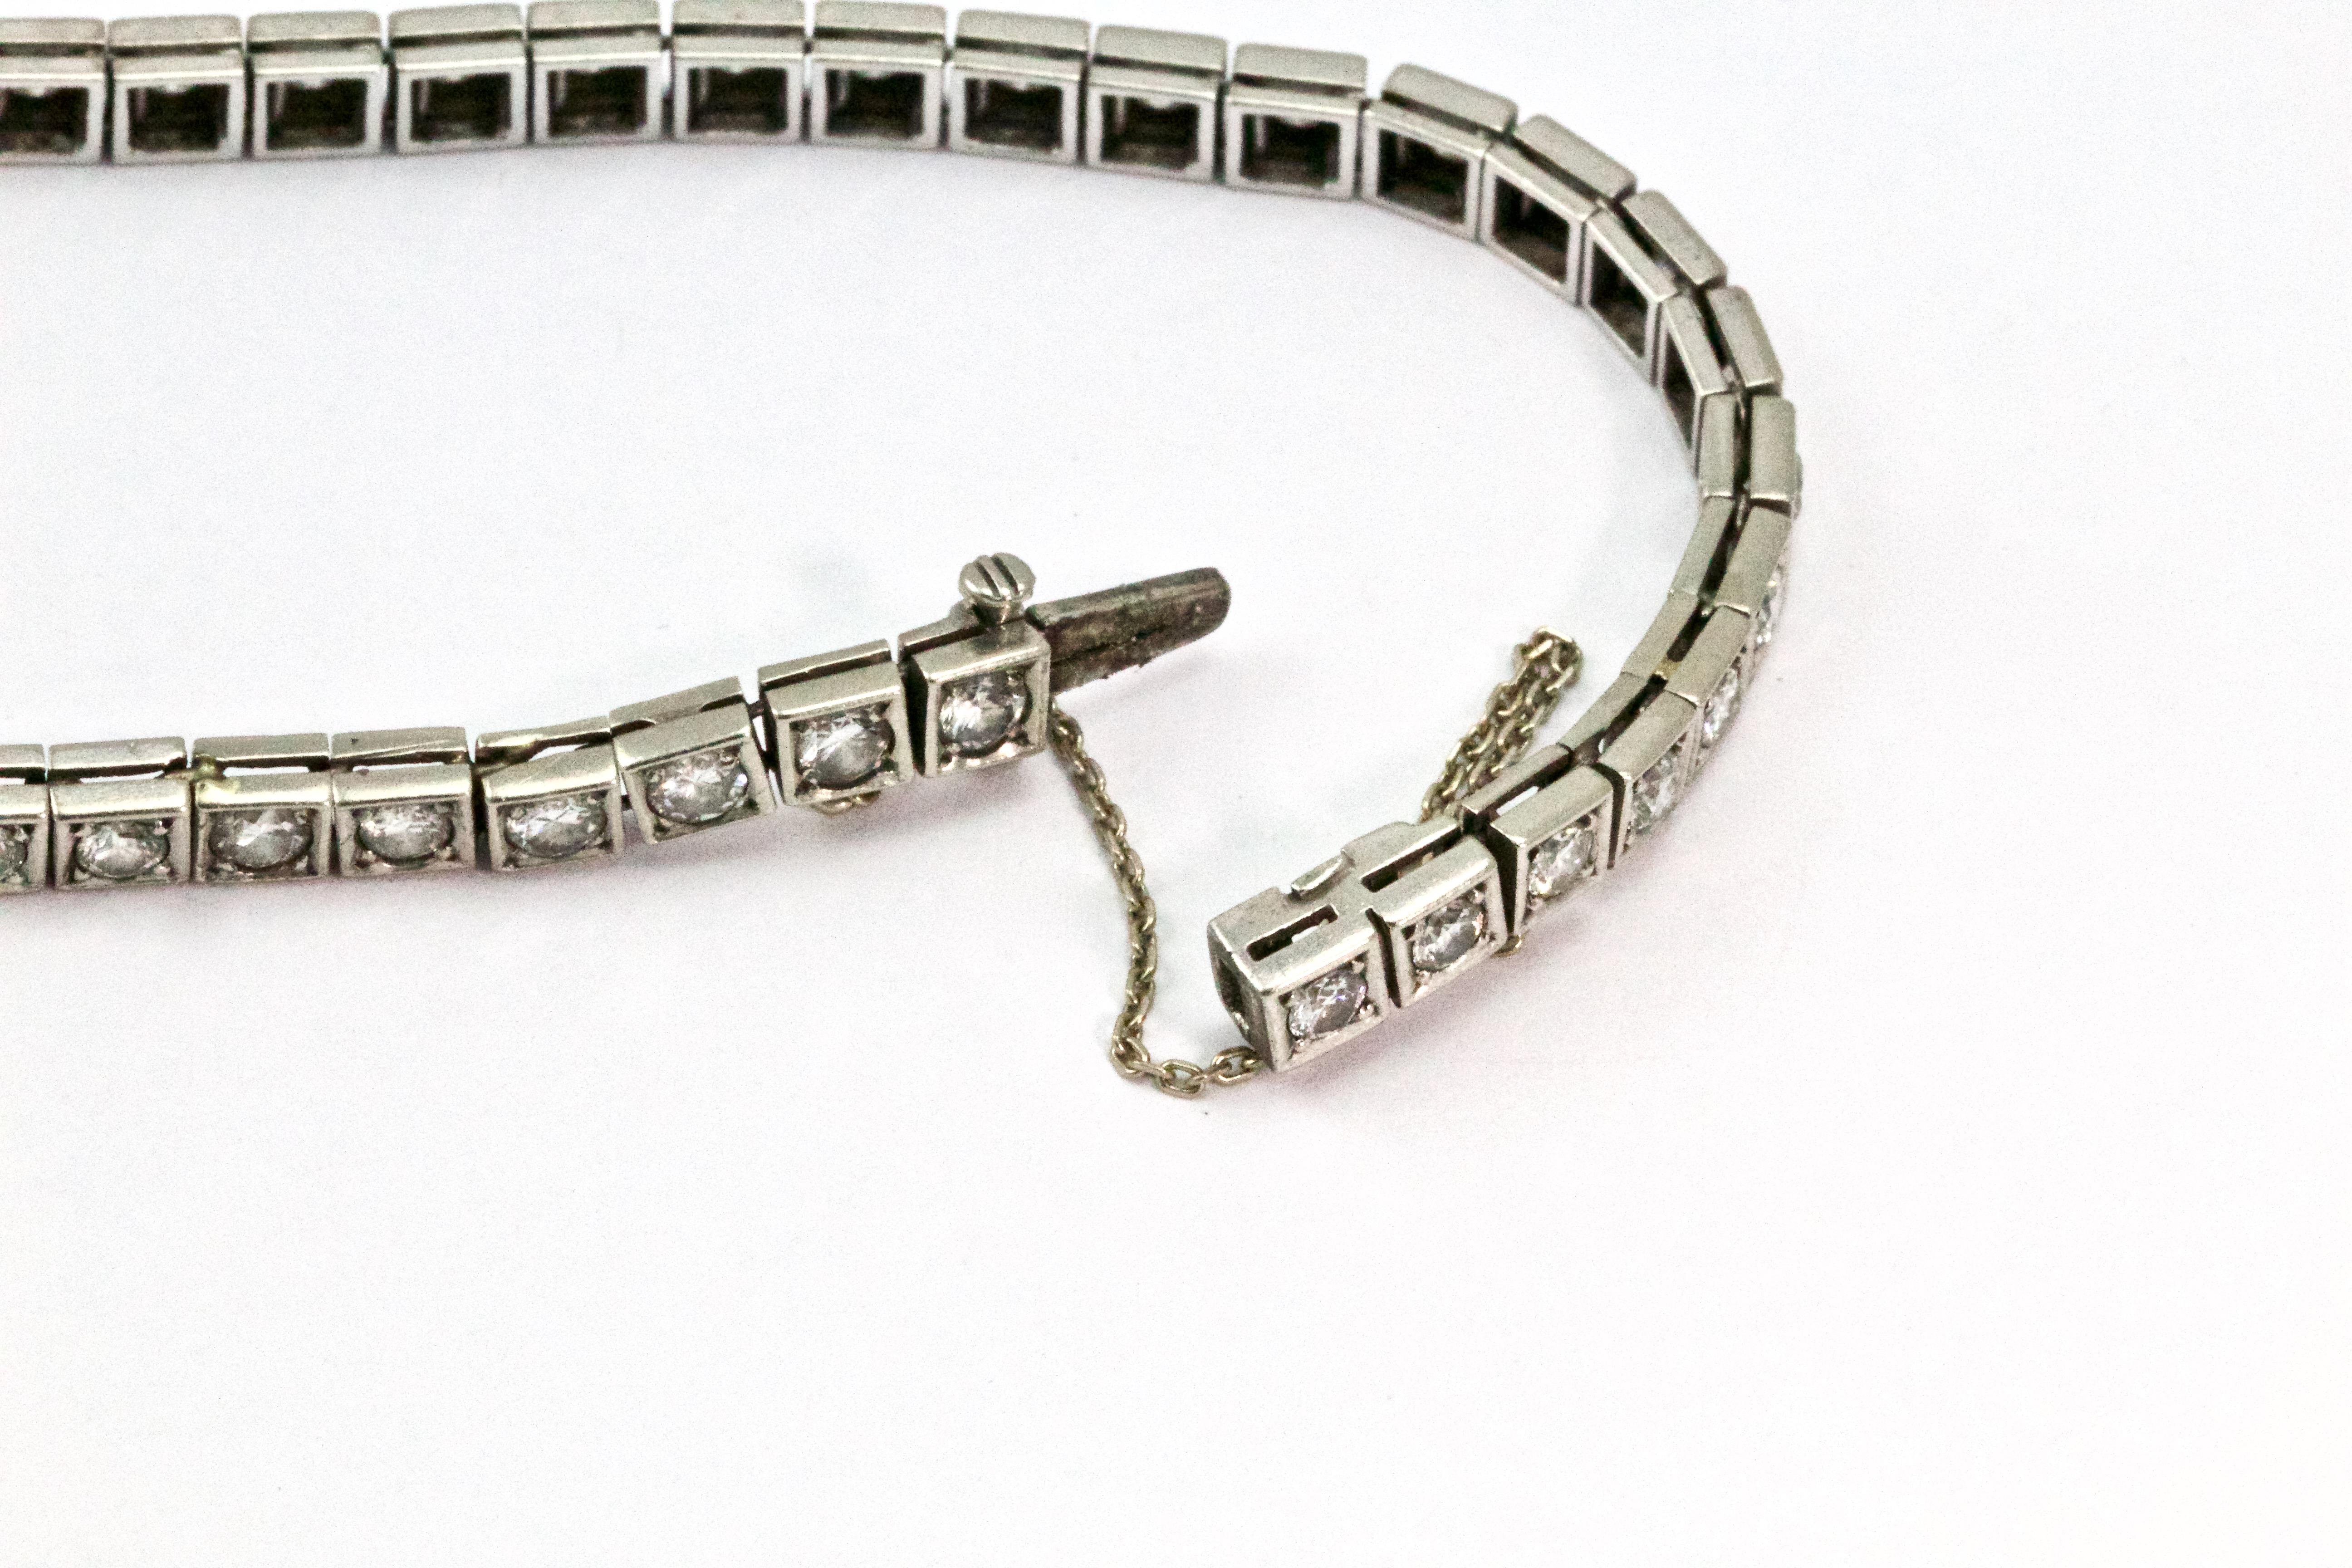 This premium tennis bracelet features 41 Old European cut diamonds set in 14 karat white gold. The diamonds are all graded H-I color and SI1-2 clarity and all together the diamonds weigh approximately 3 carat total weight. The bracelet measures 6.5